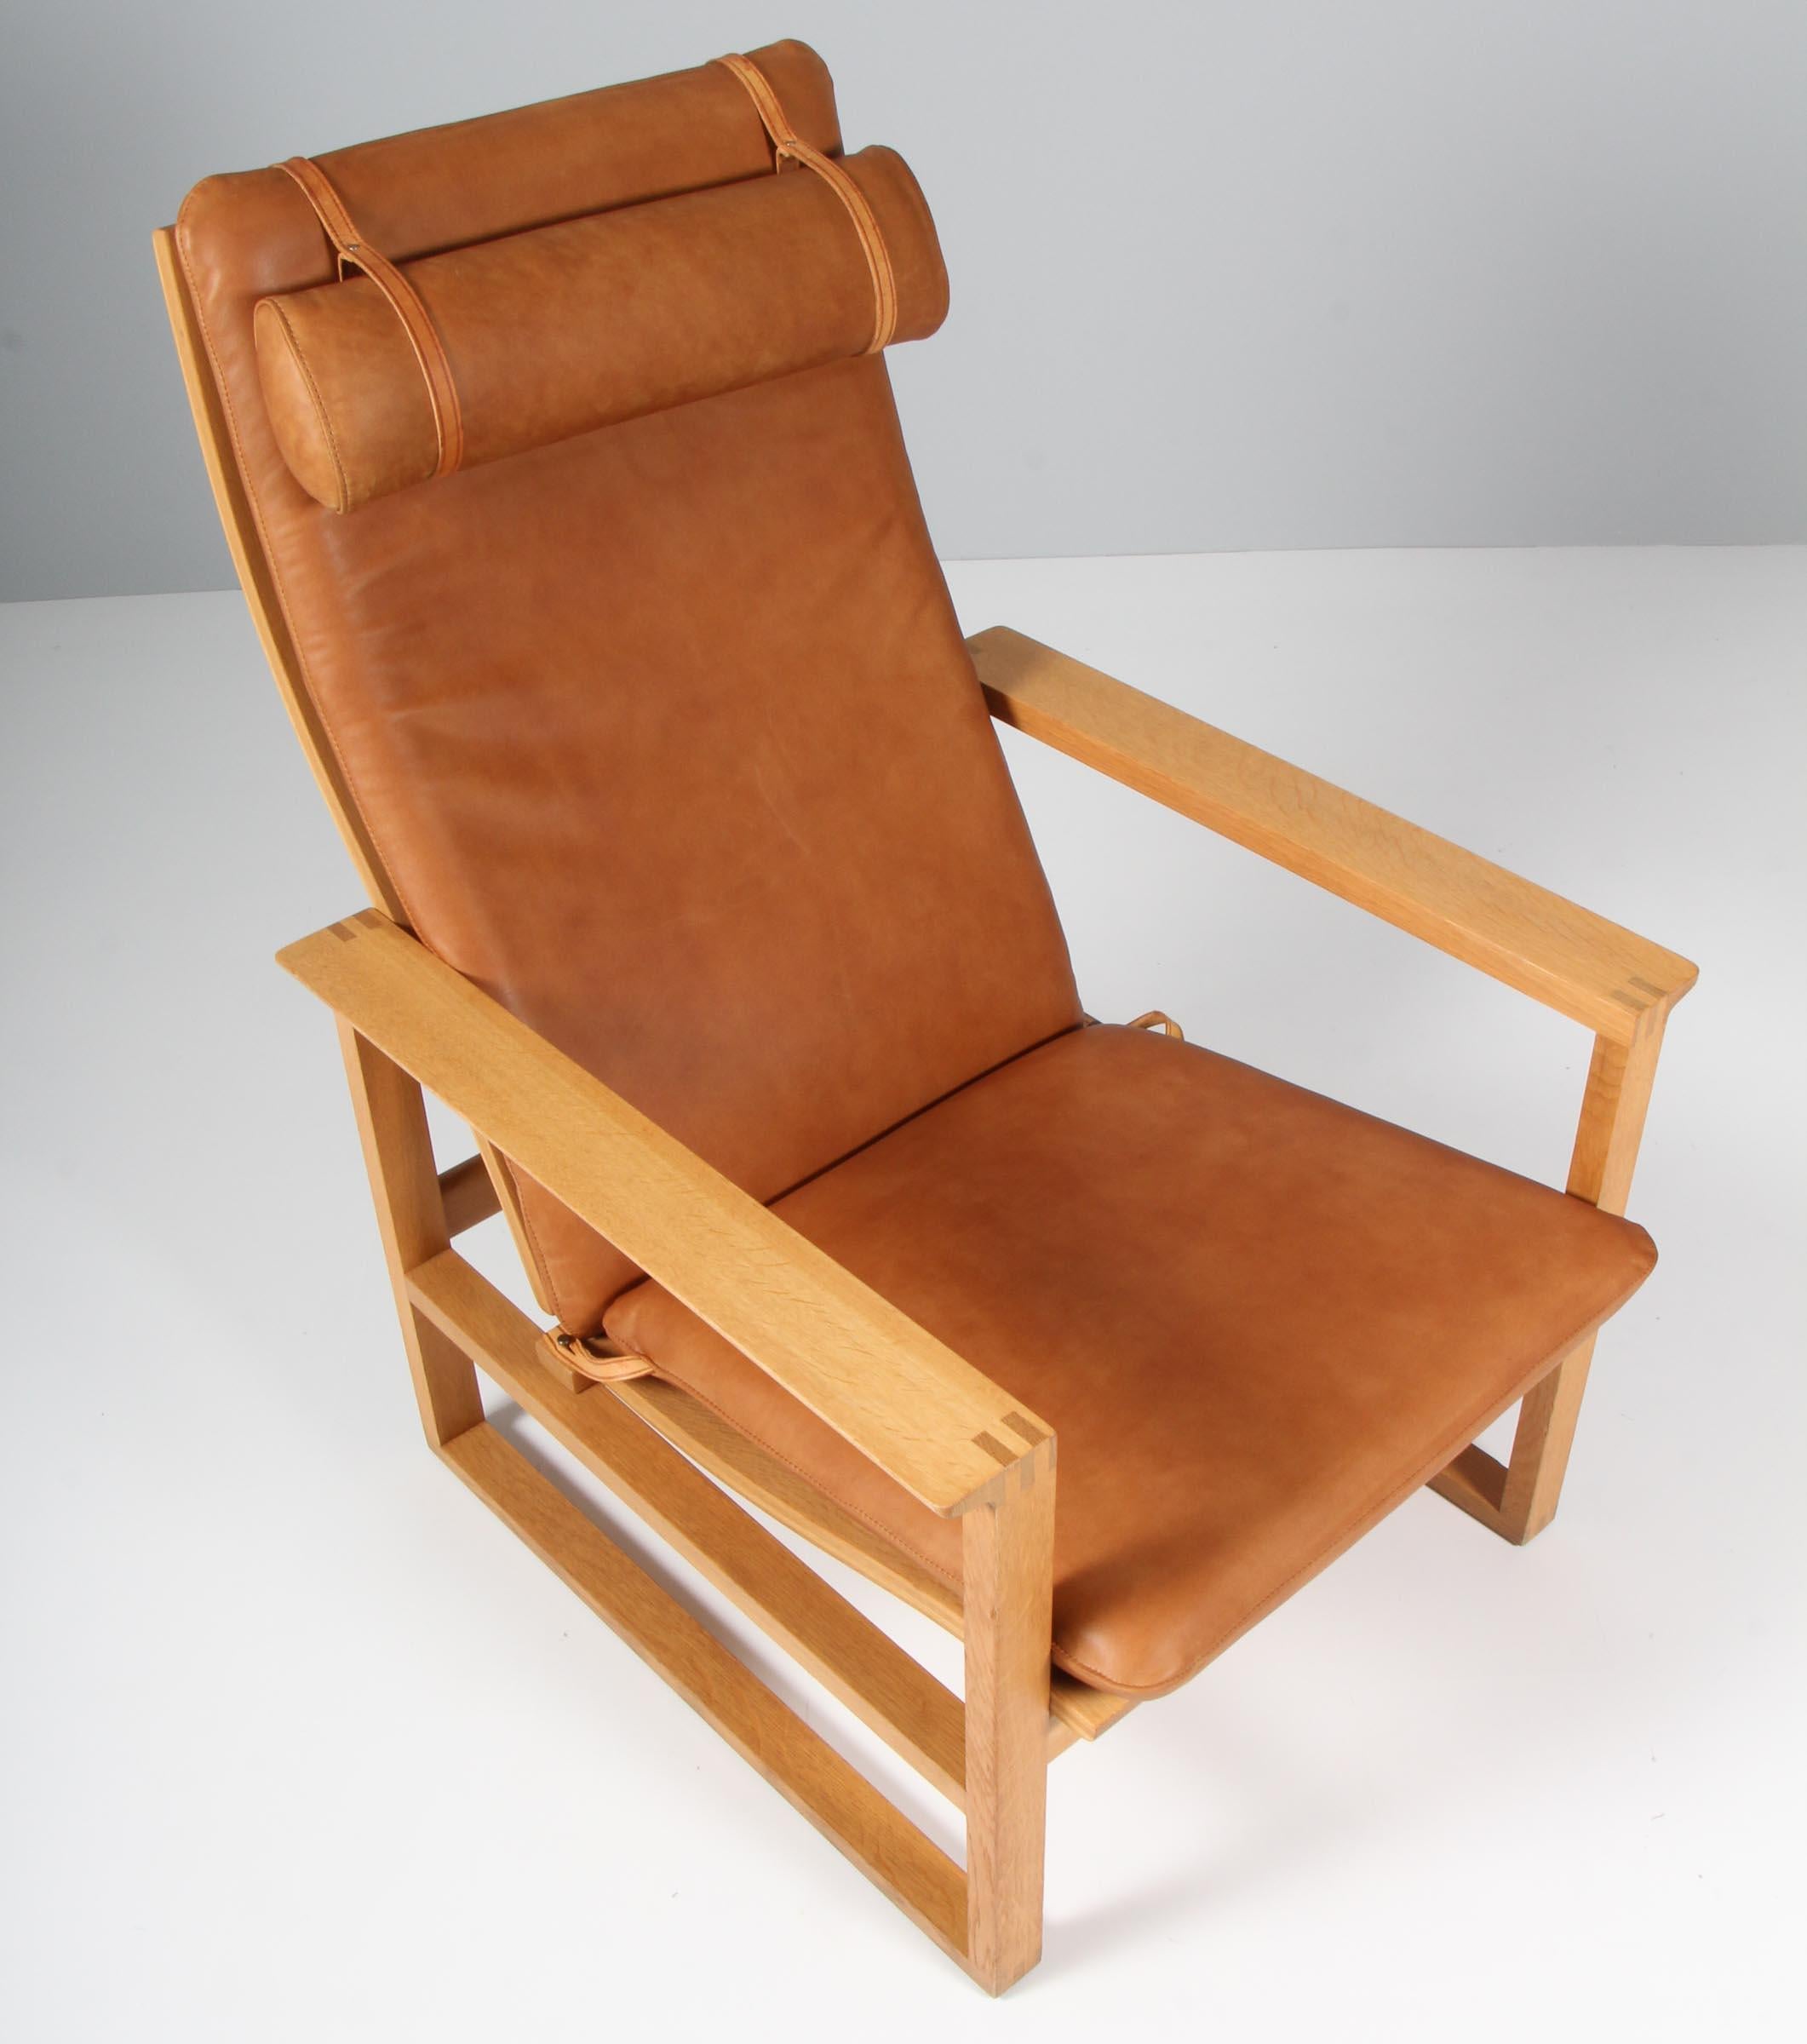 A Børge Mogensen lounge chairs designed in 1956 model number 2254 for Fredericia Stolefabrik. Cubical frames made of solid oak with finger joints and cane. 

New upholstered with cognac vintage aniline leather. The seat cushion can be fixed with a